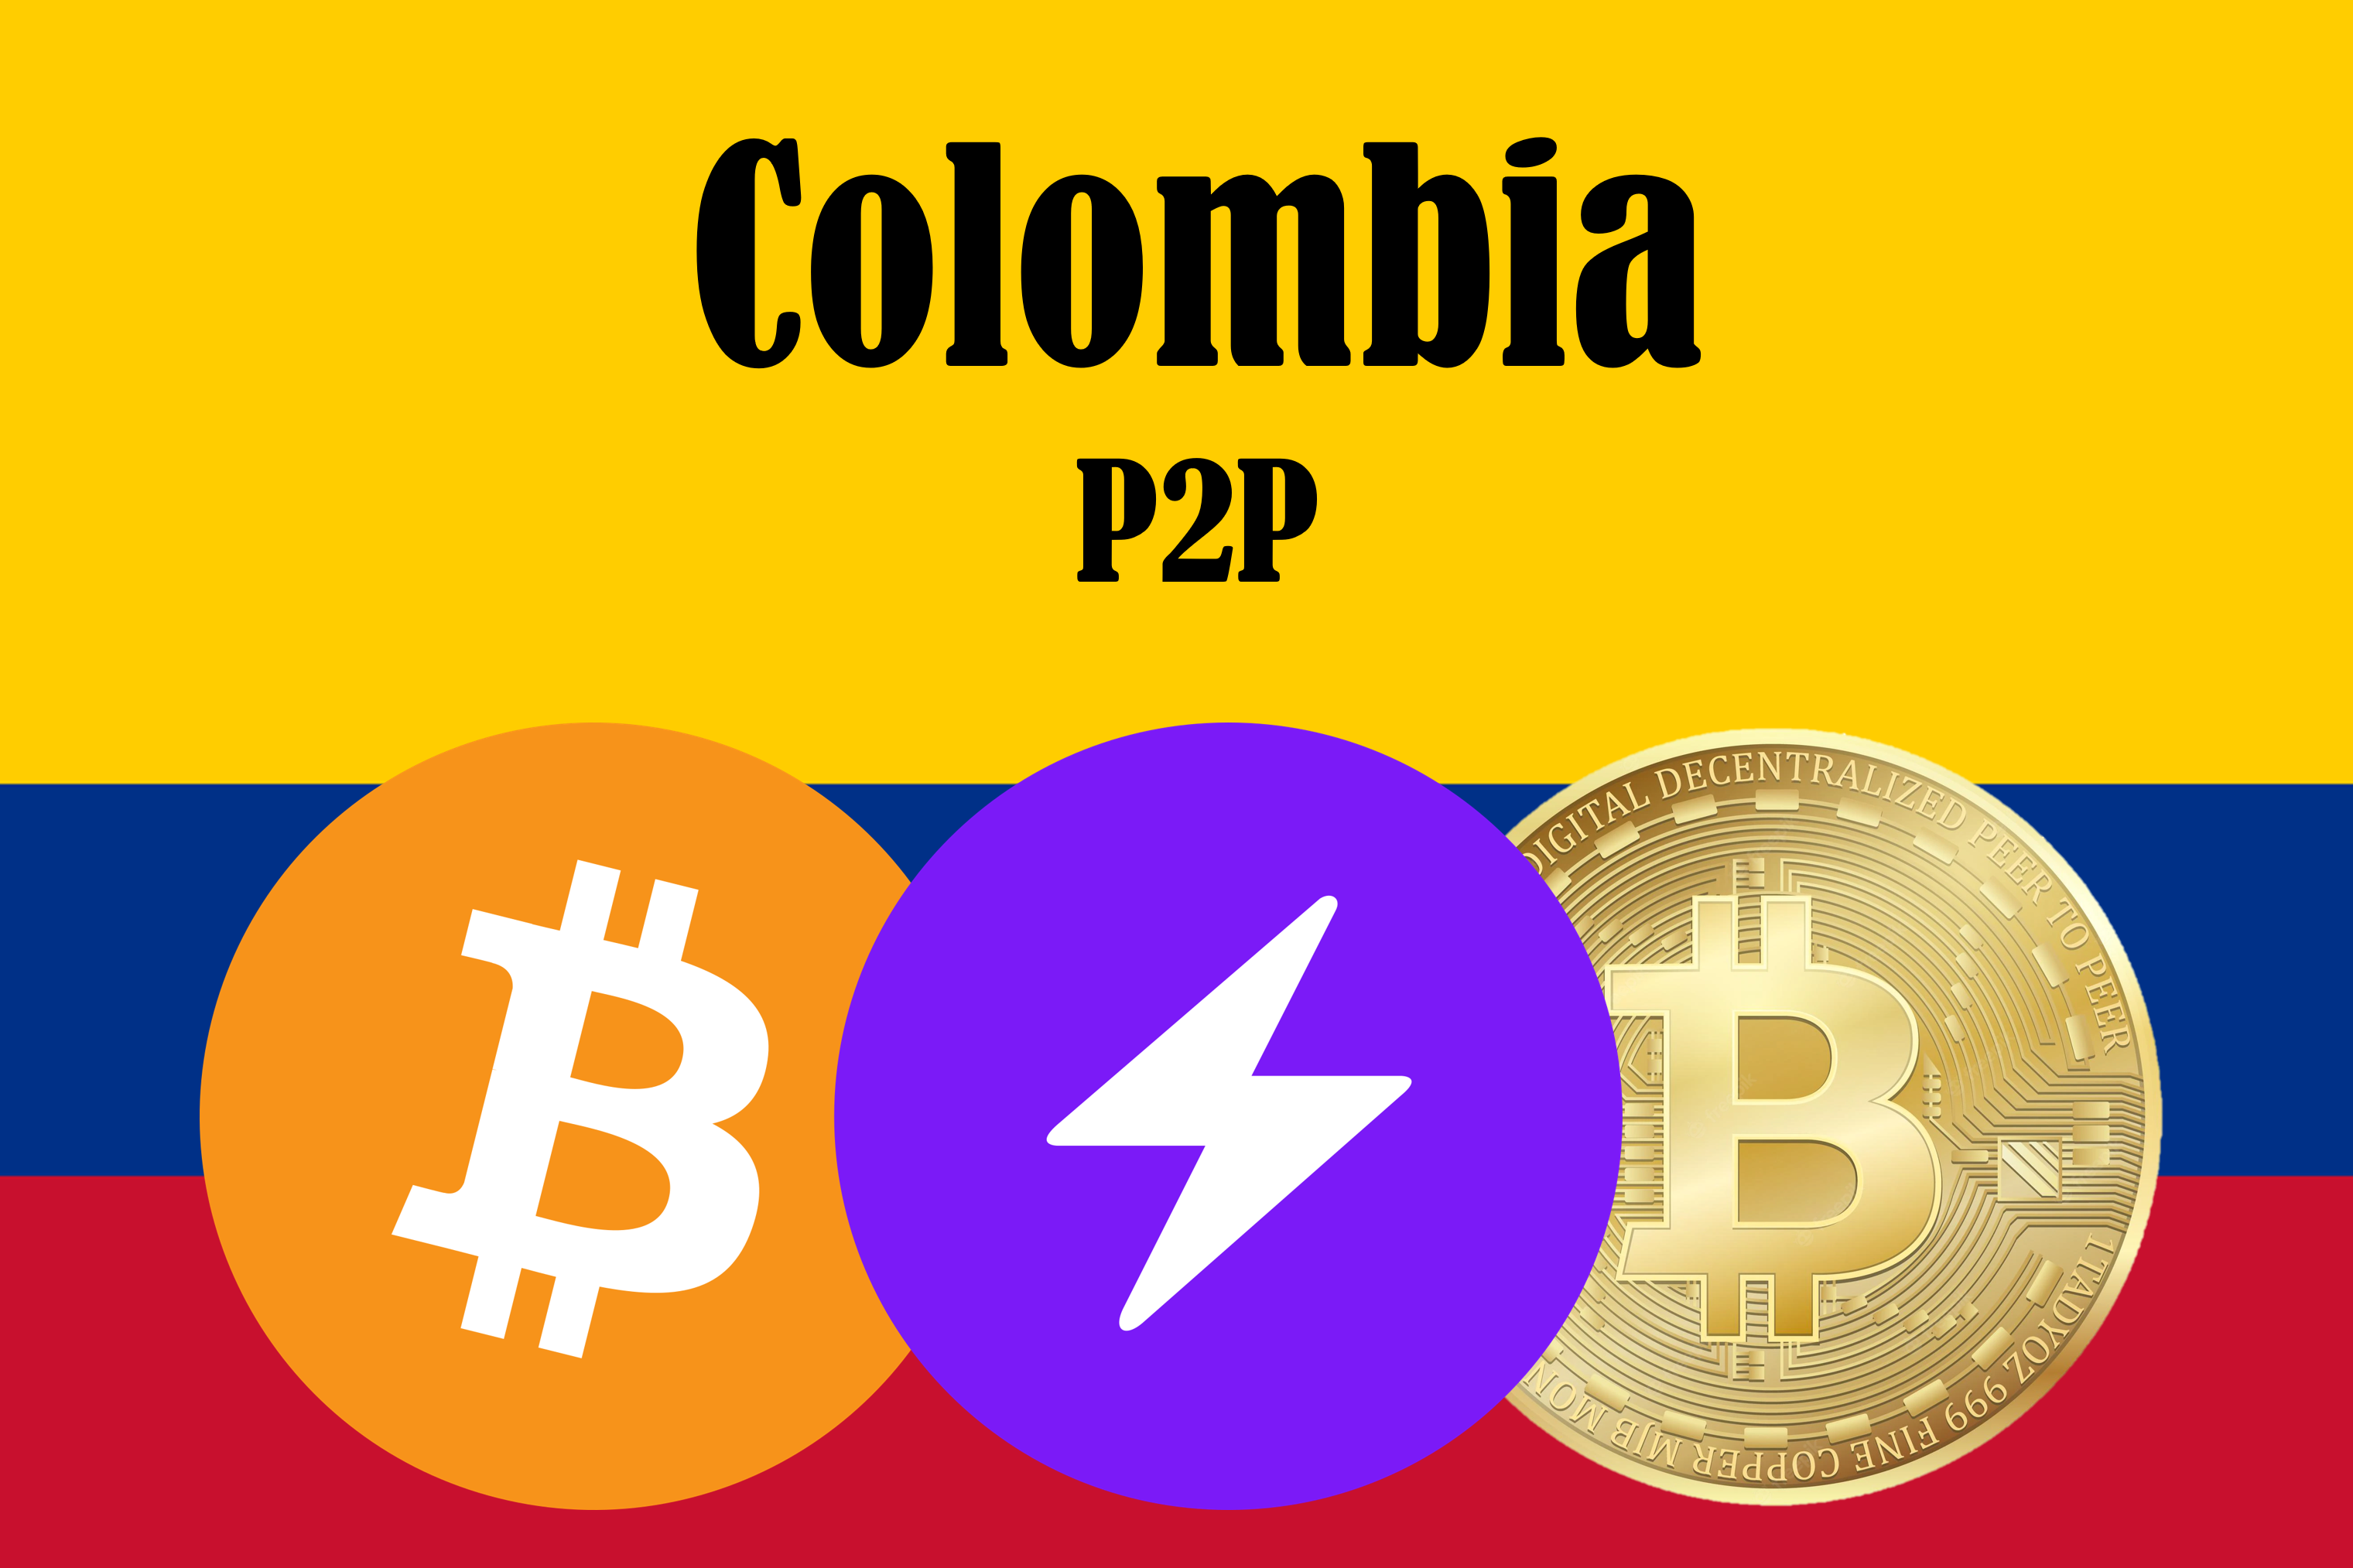 ColomBia P2P